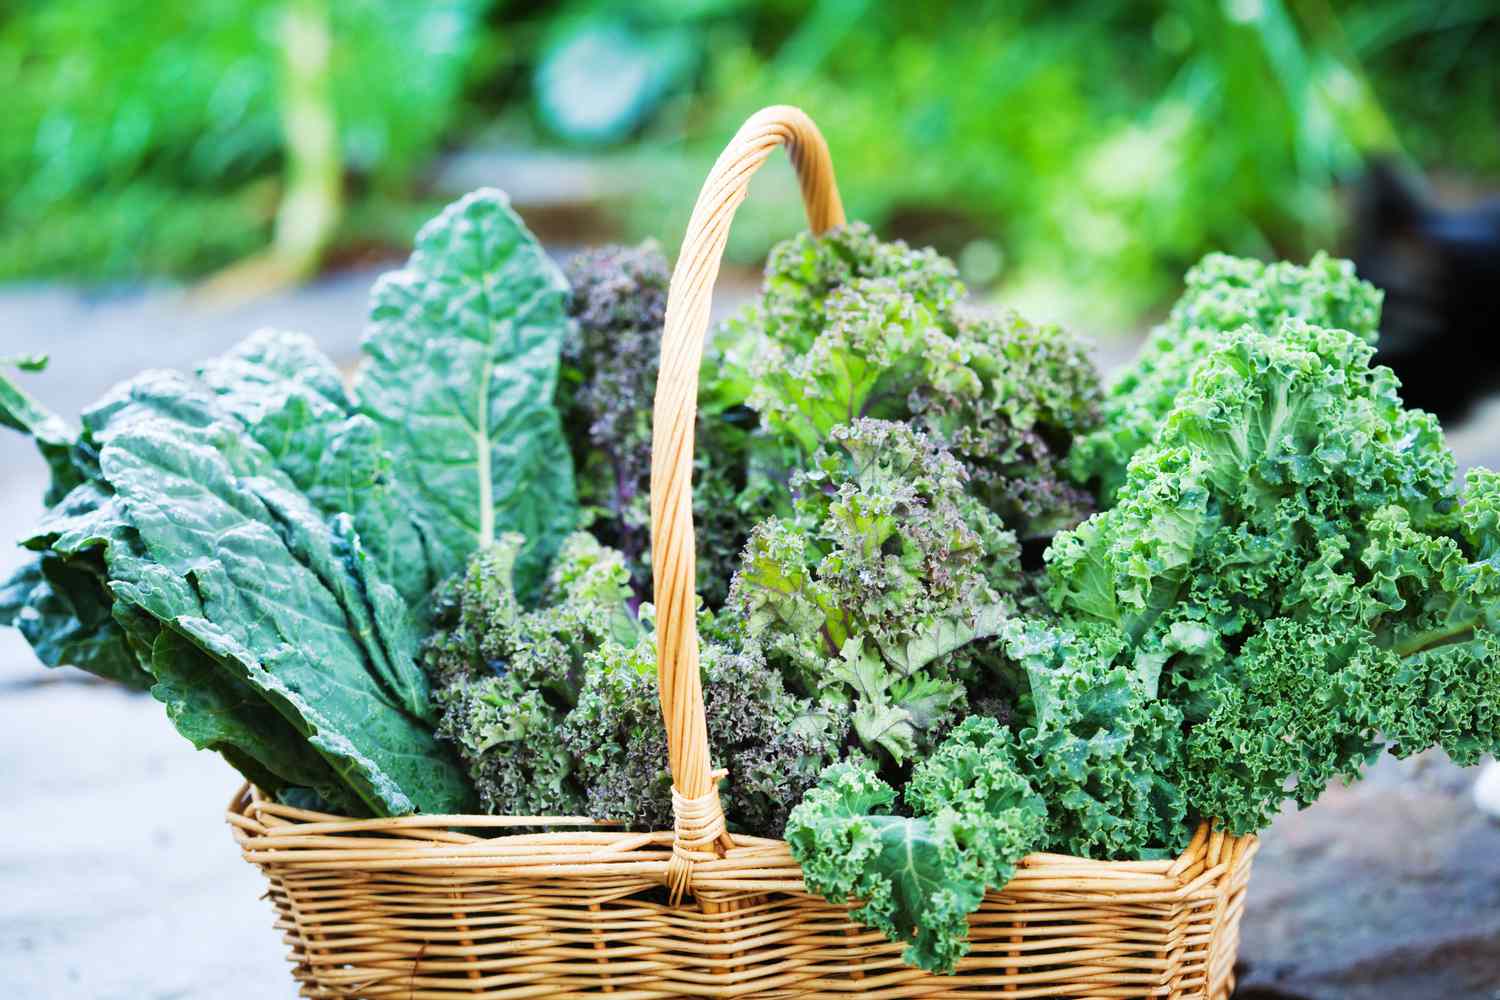 How To Store Kale From Garden